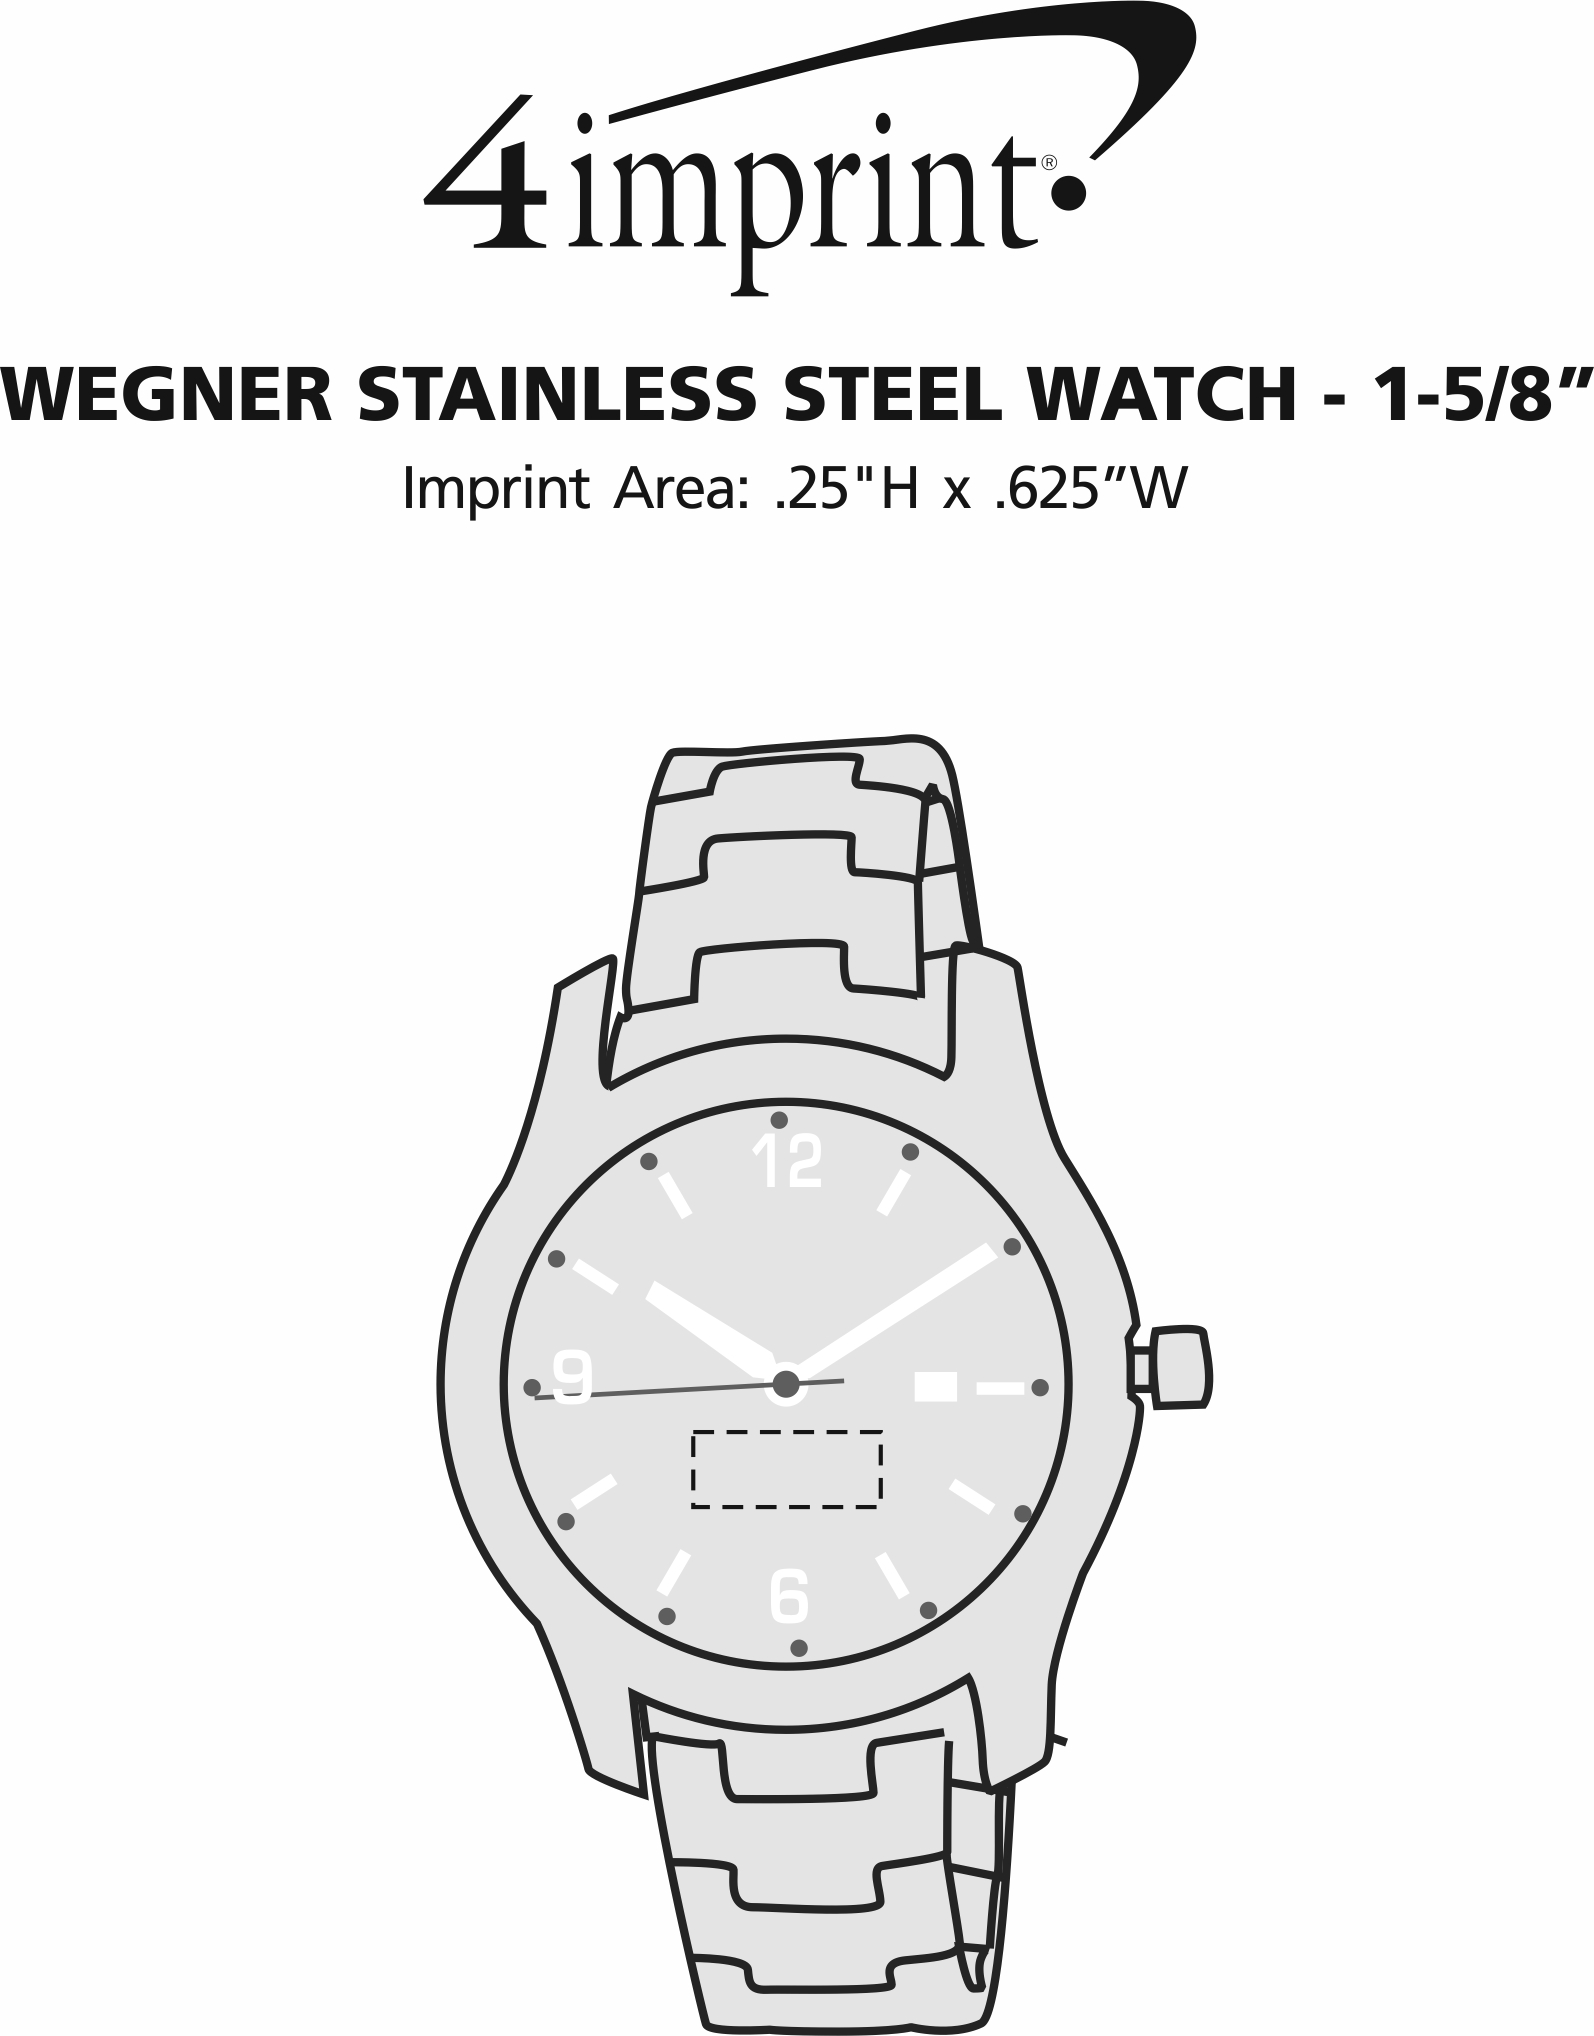 Imprint Area of Wenger Stainless Steel Watch - 1-5/8"